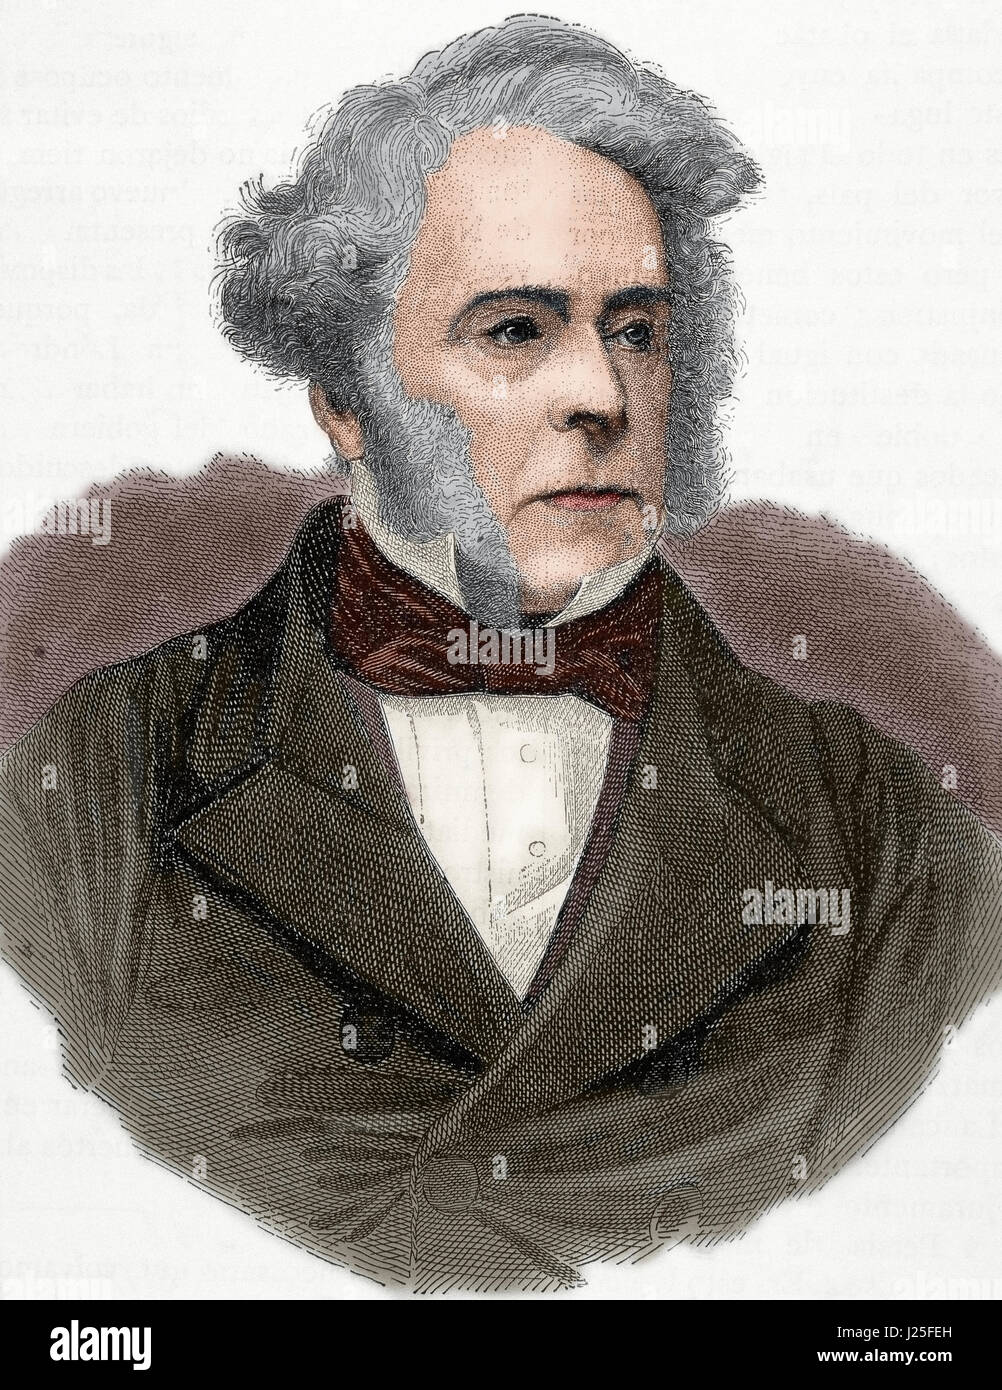 Henry John Temple, 3rd Viscount Palmerston (1784-1865). British statesman. He served twice as Prime Minister of the United Kingdom. Portrait. Engraving. Colored. Stock Photo